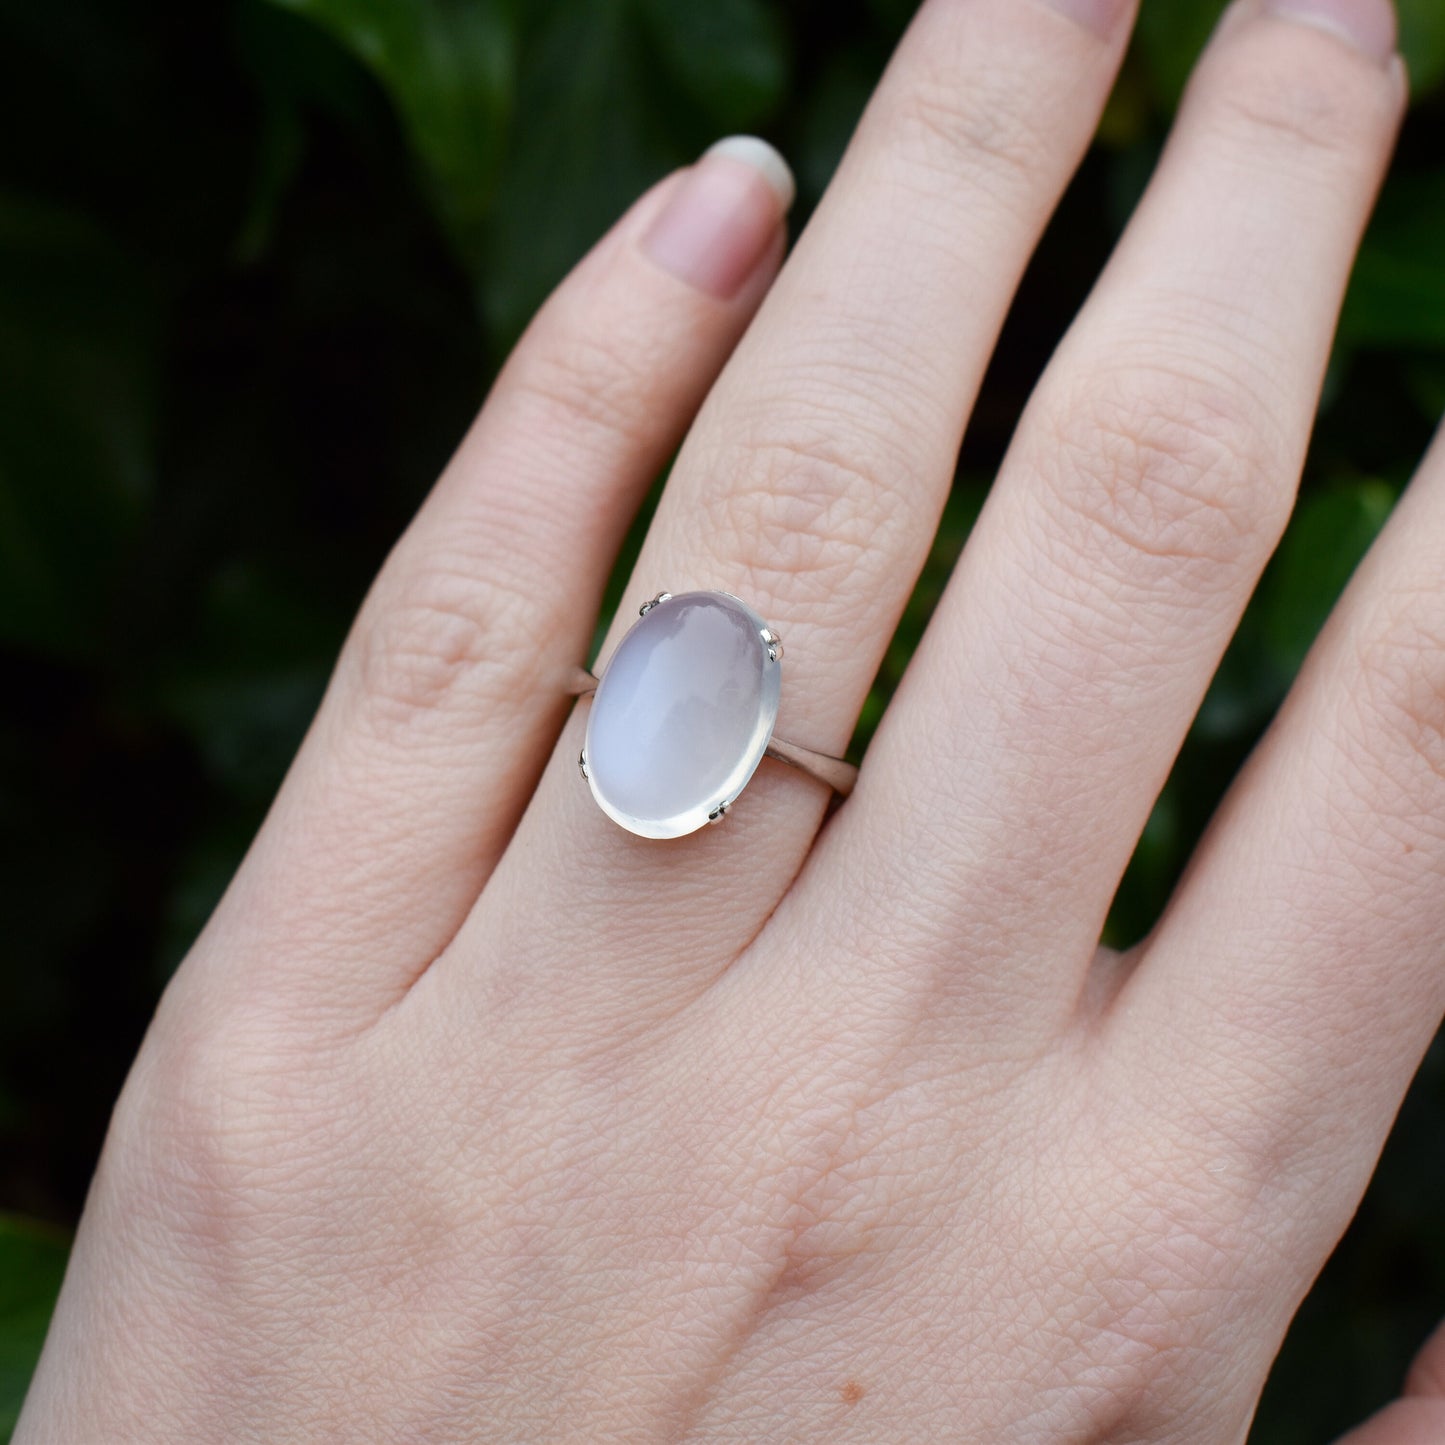 Vintage Cabochon Moonstone Oval Solitaire 18ct White Gold Ring | Art Deco